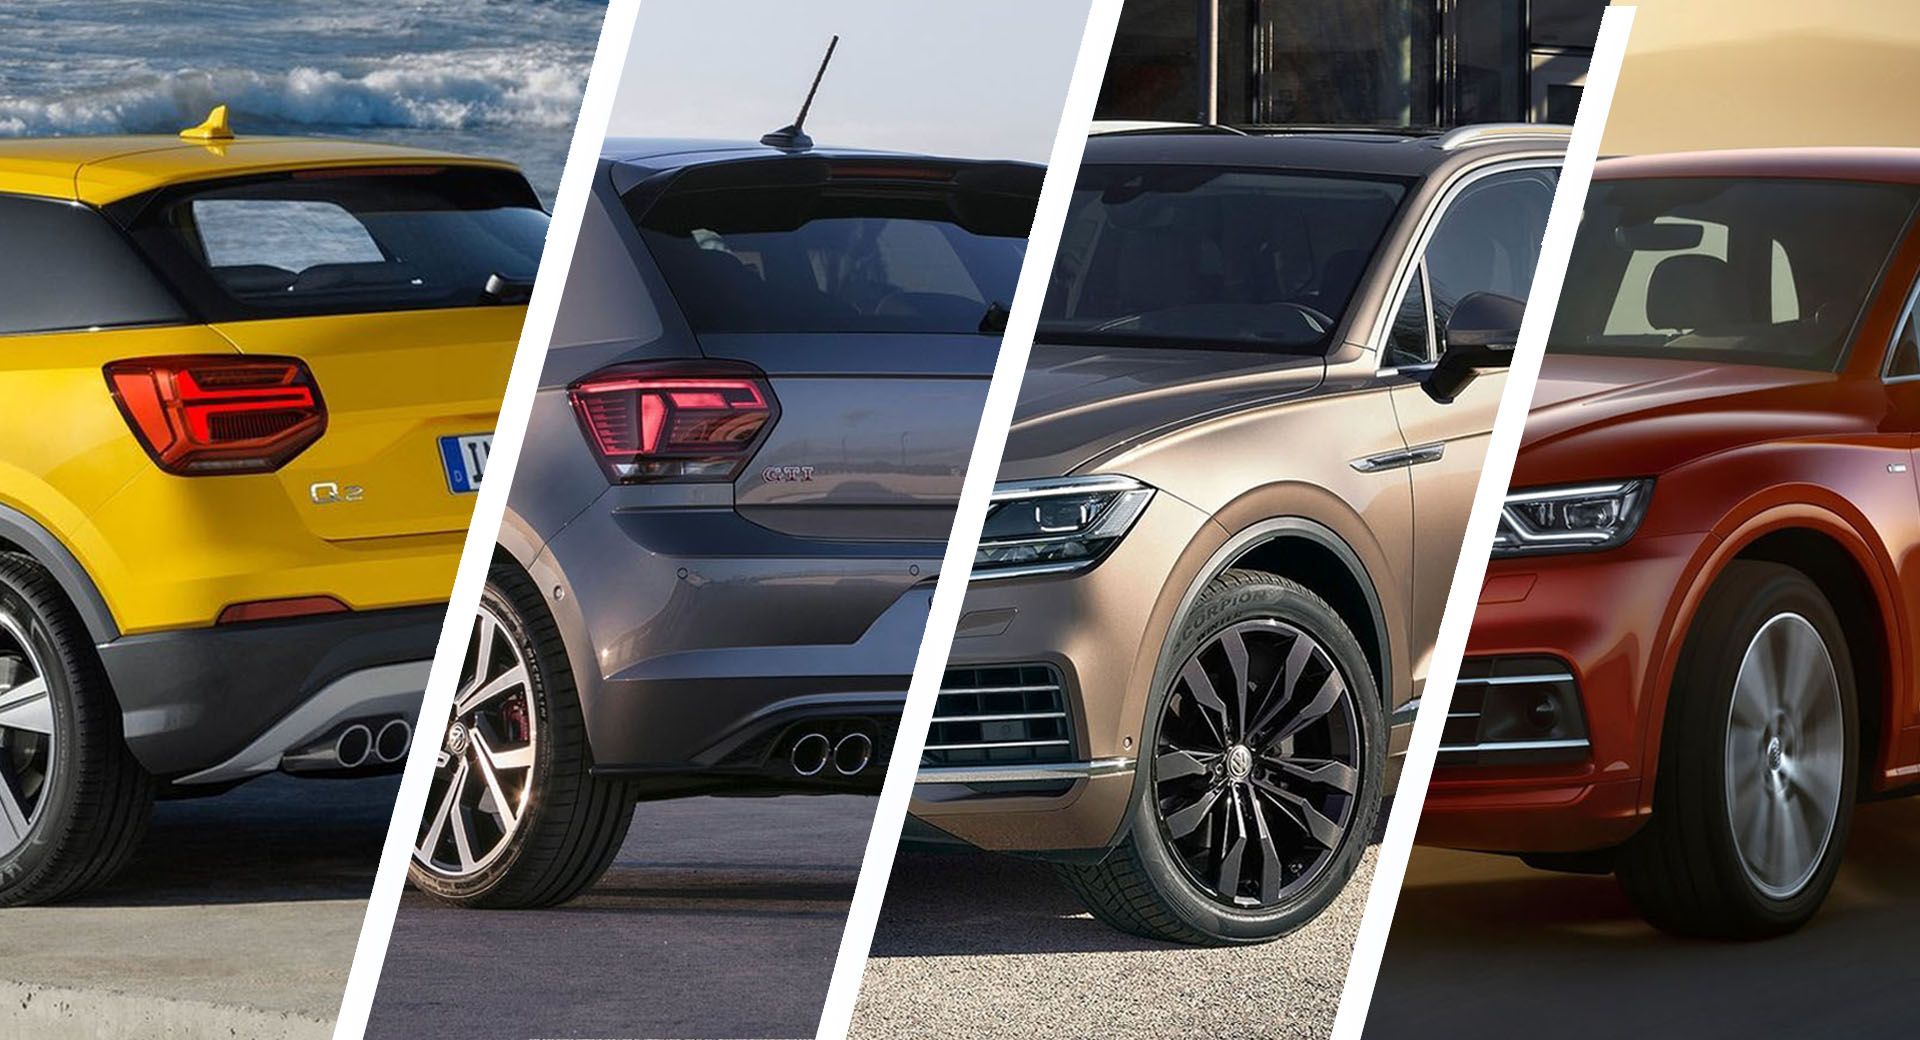 Has VW Group Gone Too Far On Sharing Design Details Between Brands